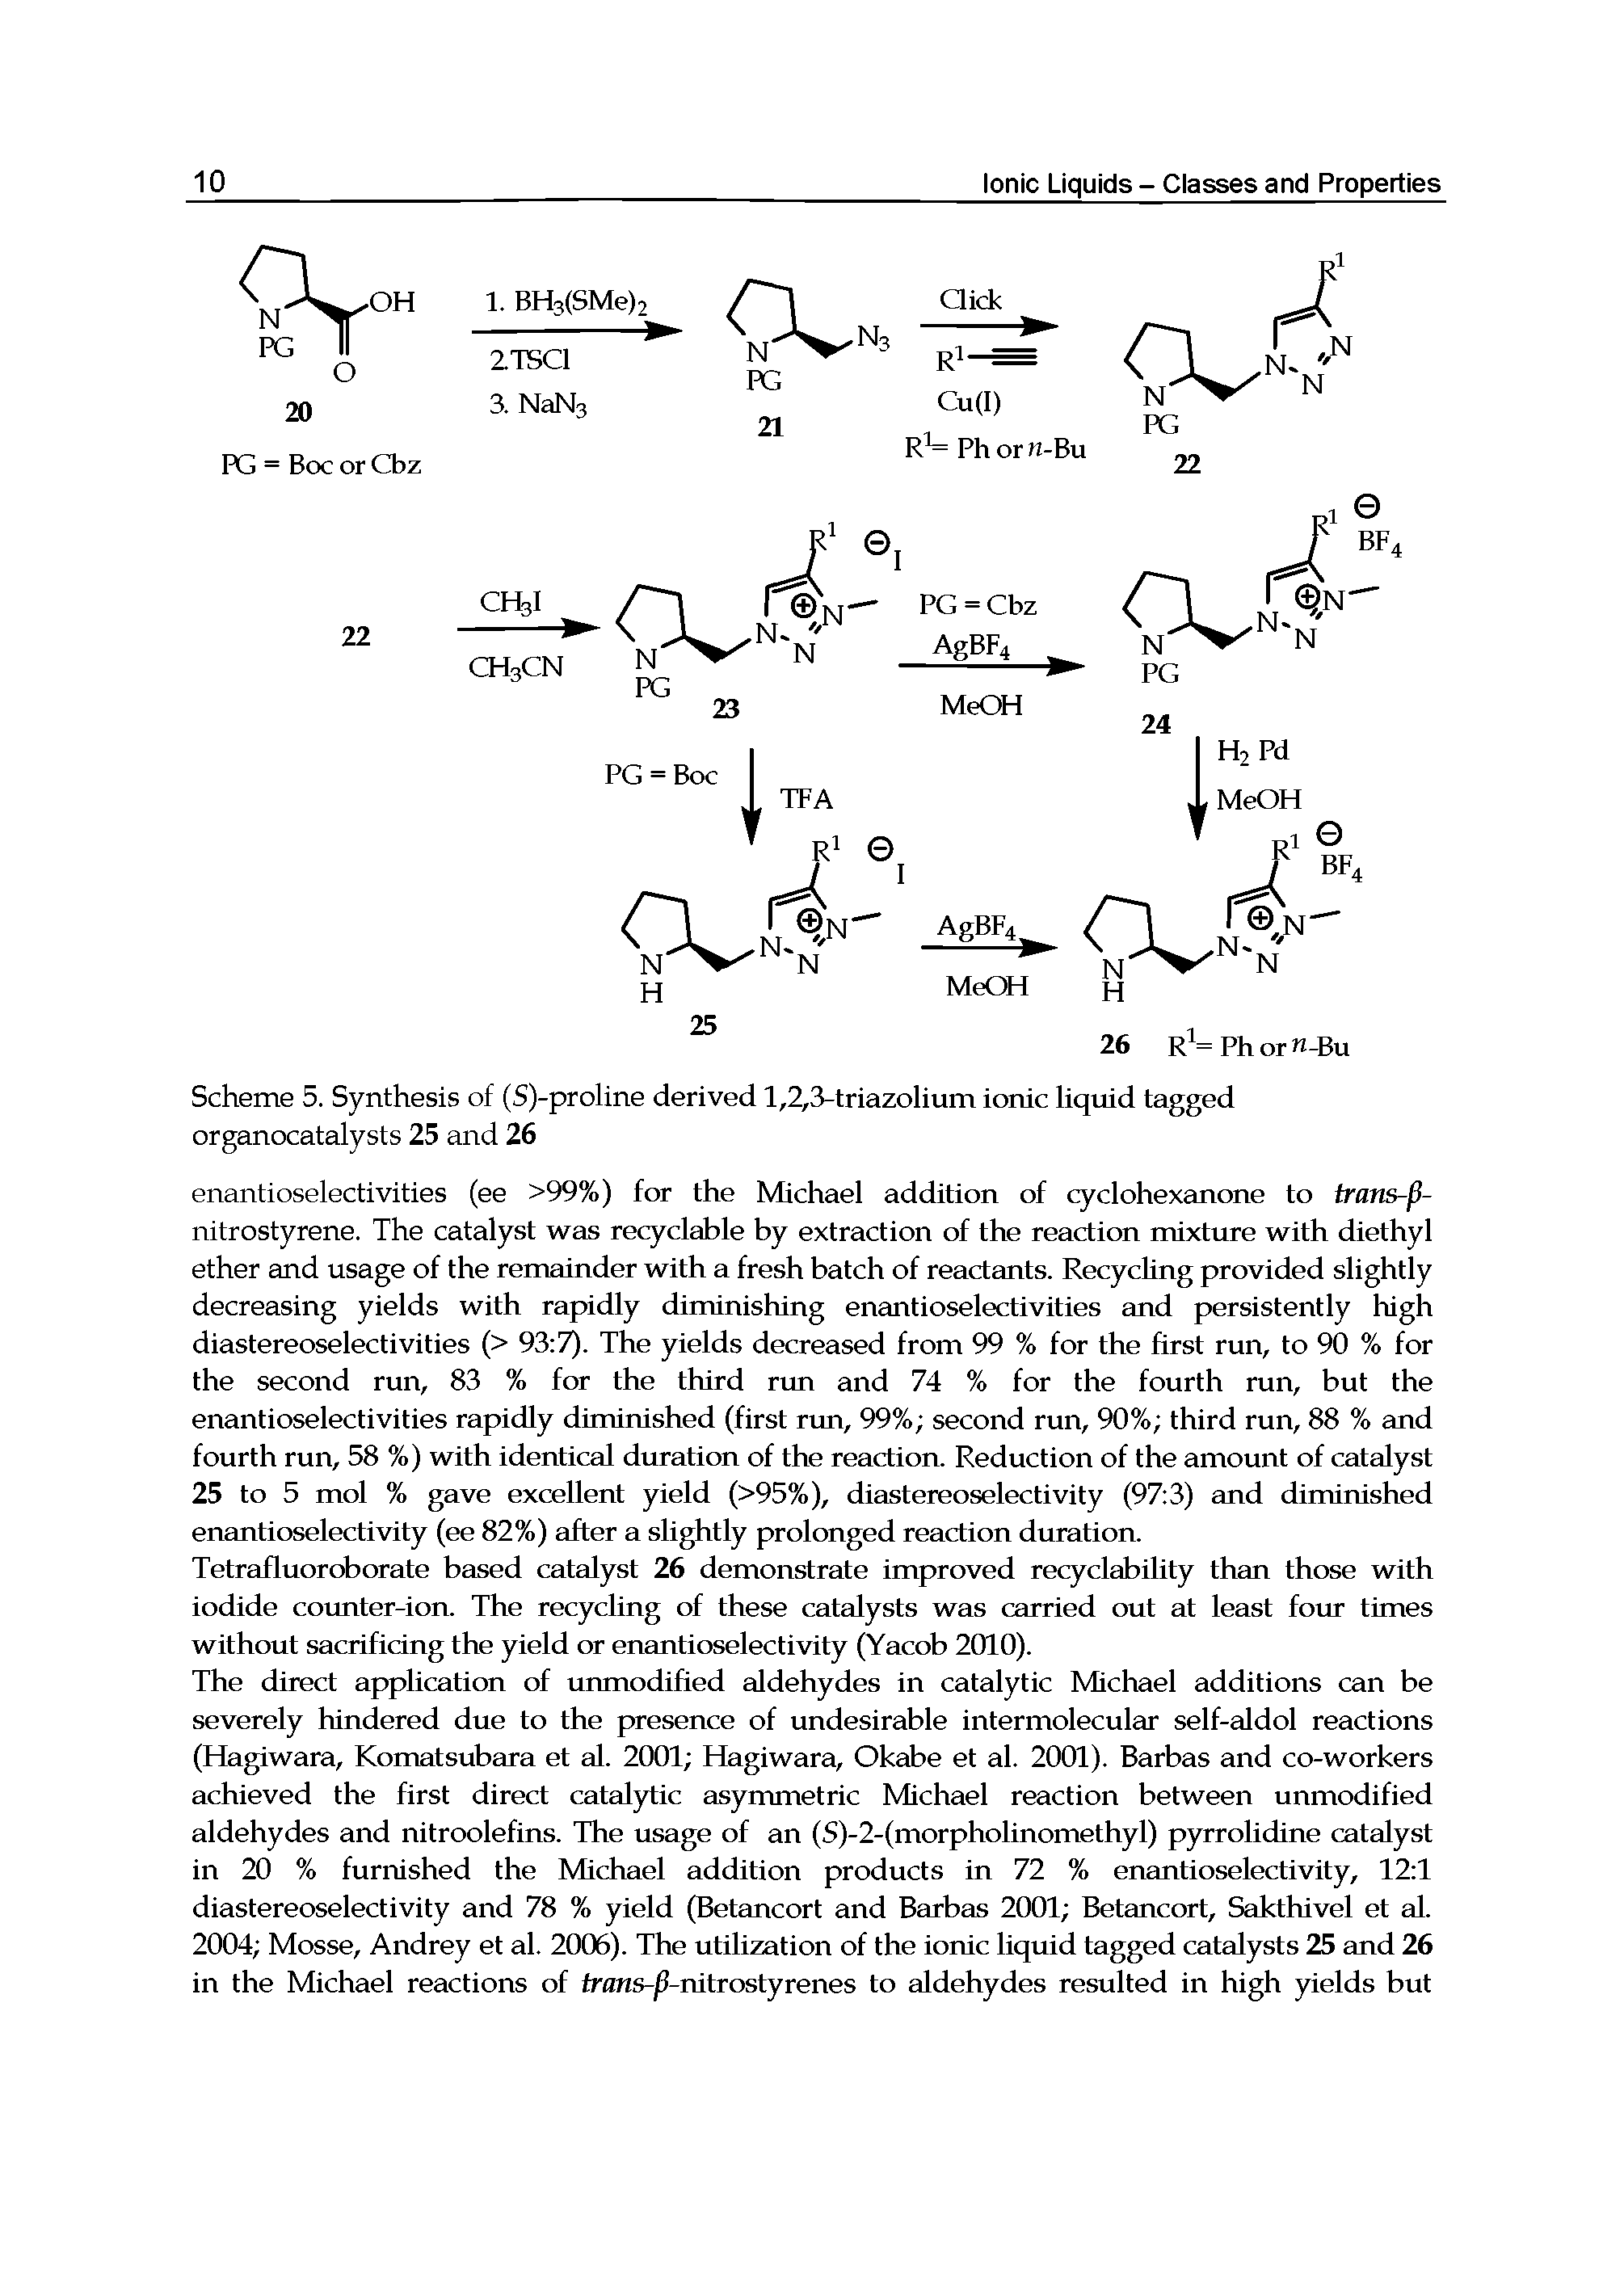 Scheme 5. Synthesis of (S)-proline derived 1,2,3-triazolium ionic liquid tagged organocatalysts 25 and 26...